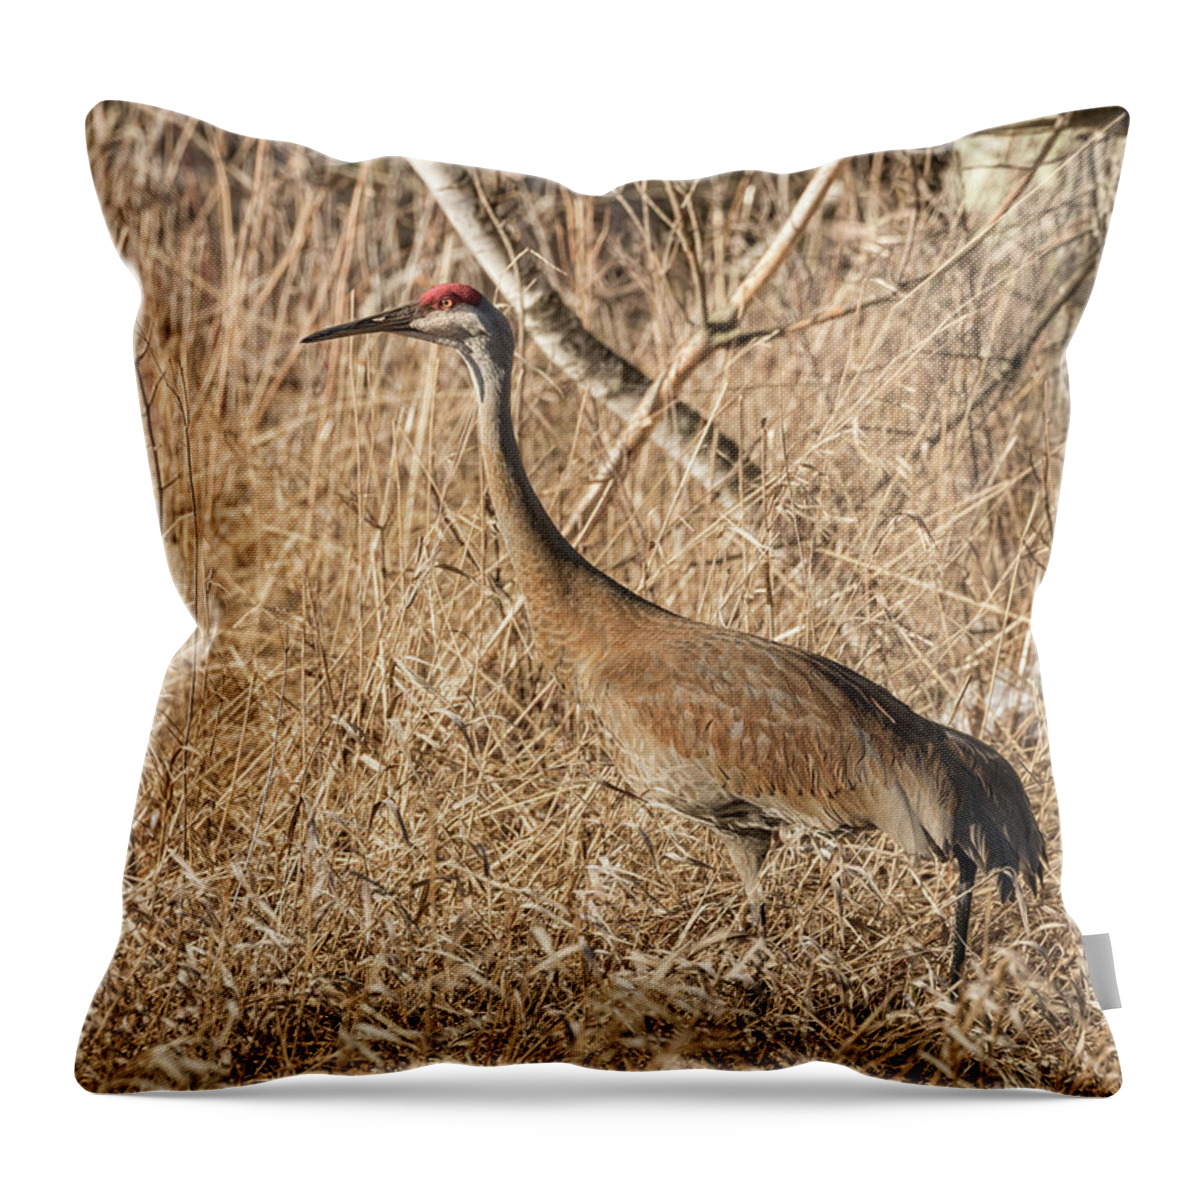 Sandhill Crane Throw Pillow featuring the photograph Sandhill Crane 2016-7 by Thomas Young